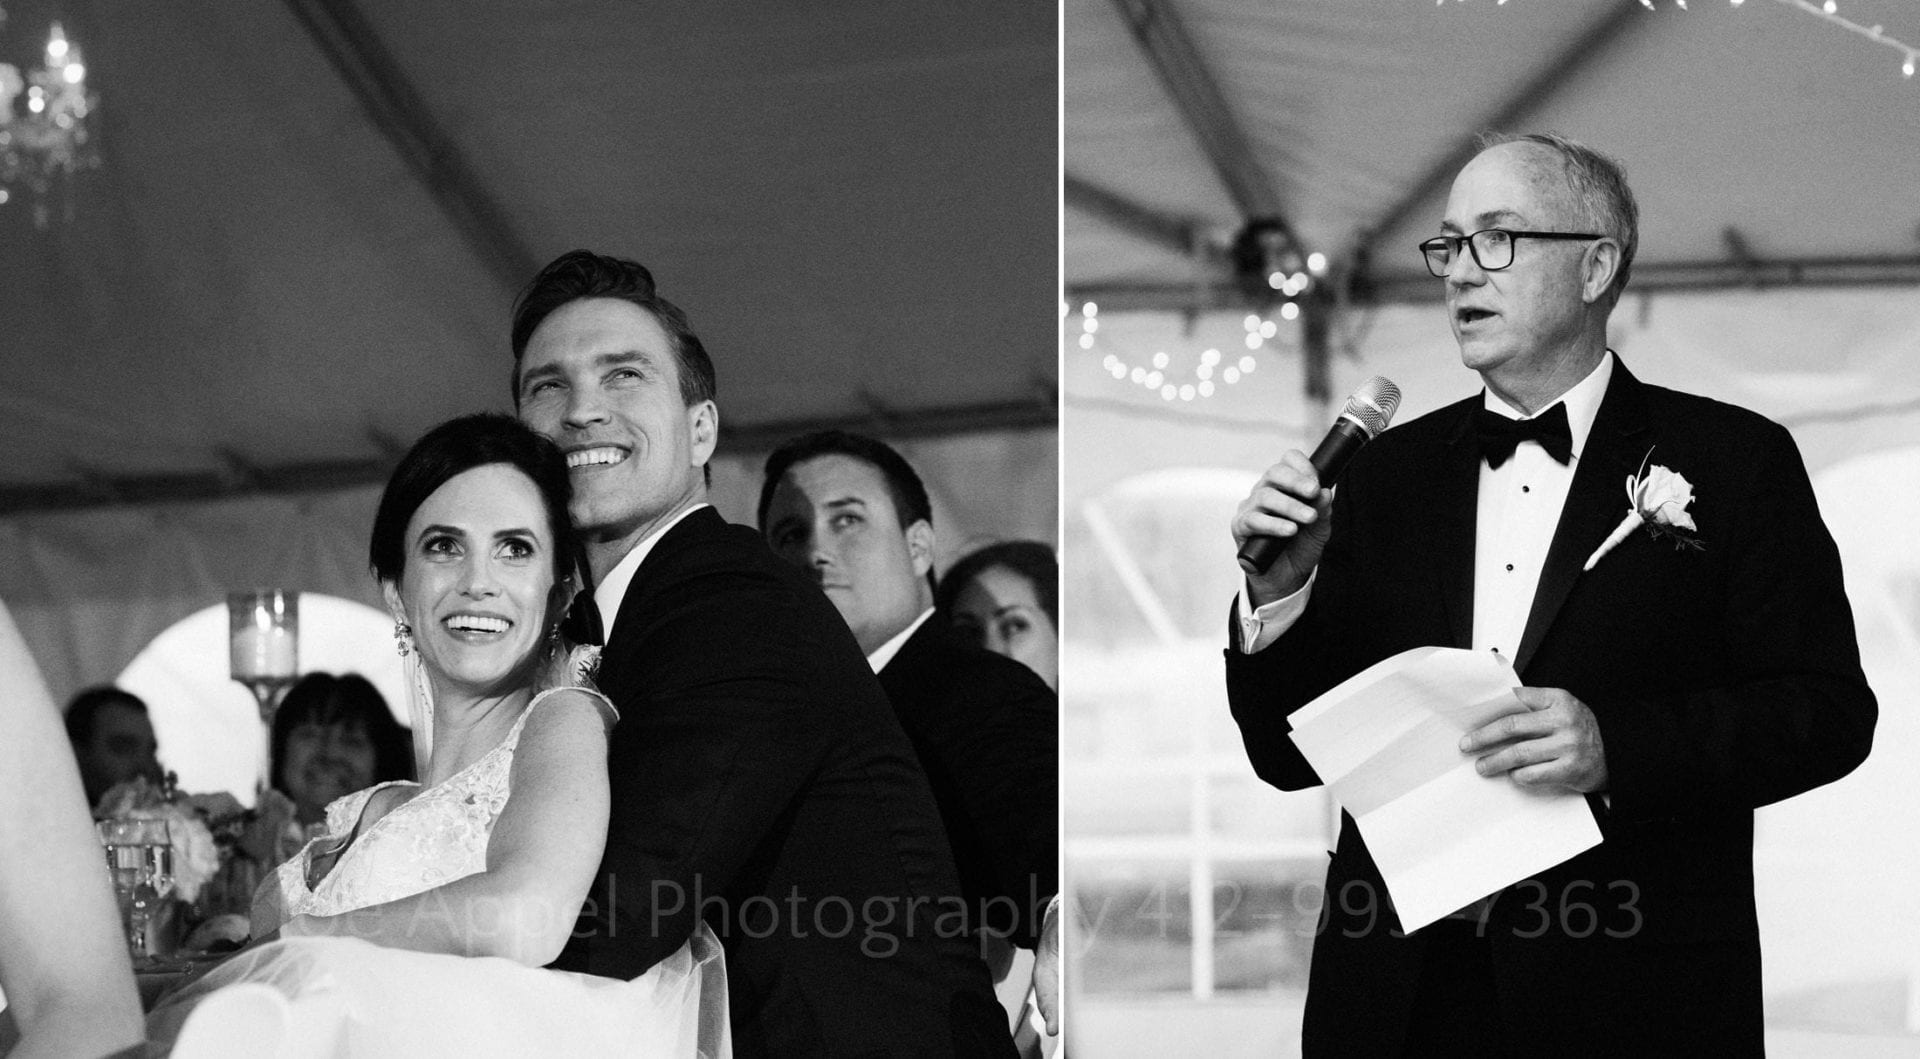 two photos: a bride and groom sit closely together as they listen to the bride's father (second photo) give a toast.